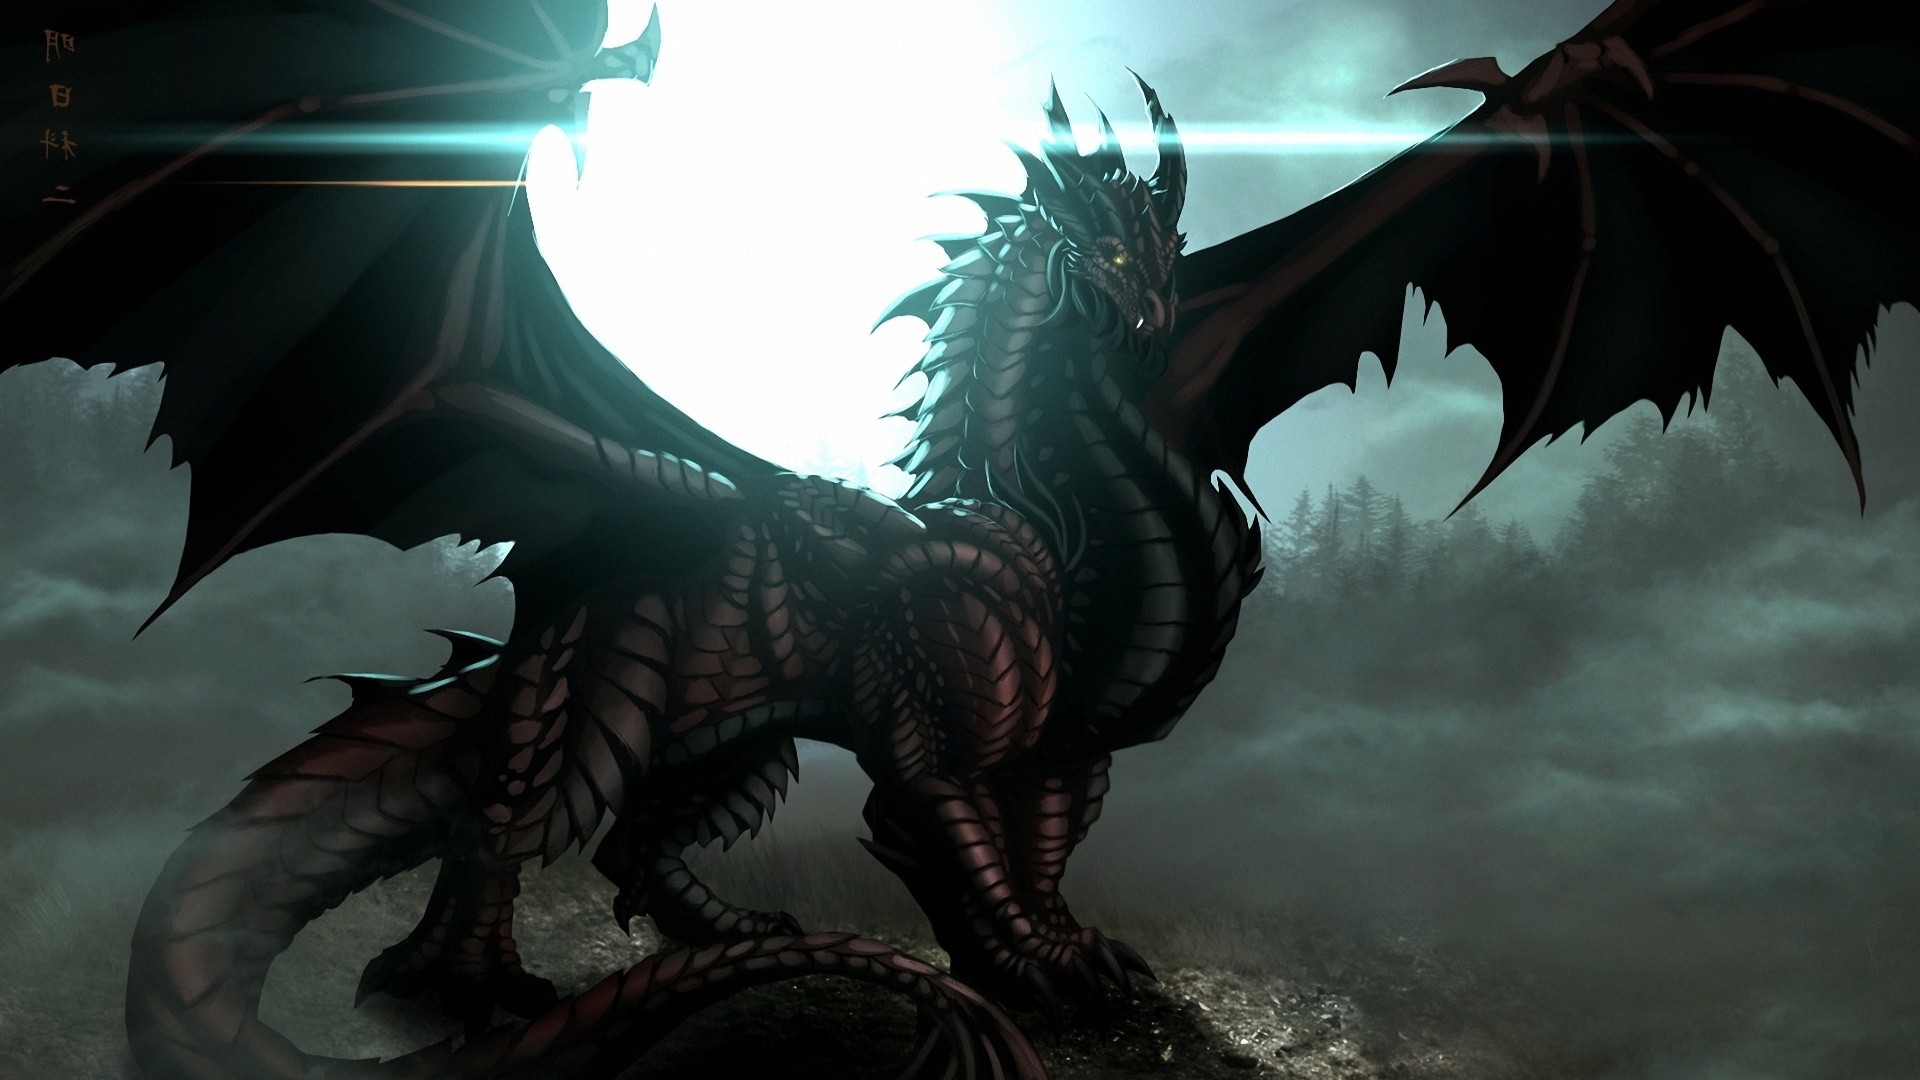 1920x1080 Collection of Black Dragon Wallpaper Hd on Spyder Wallpapers